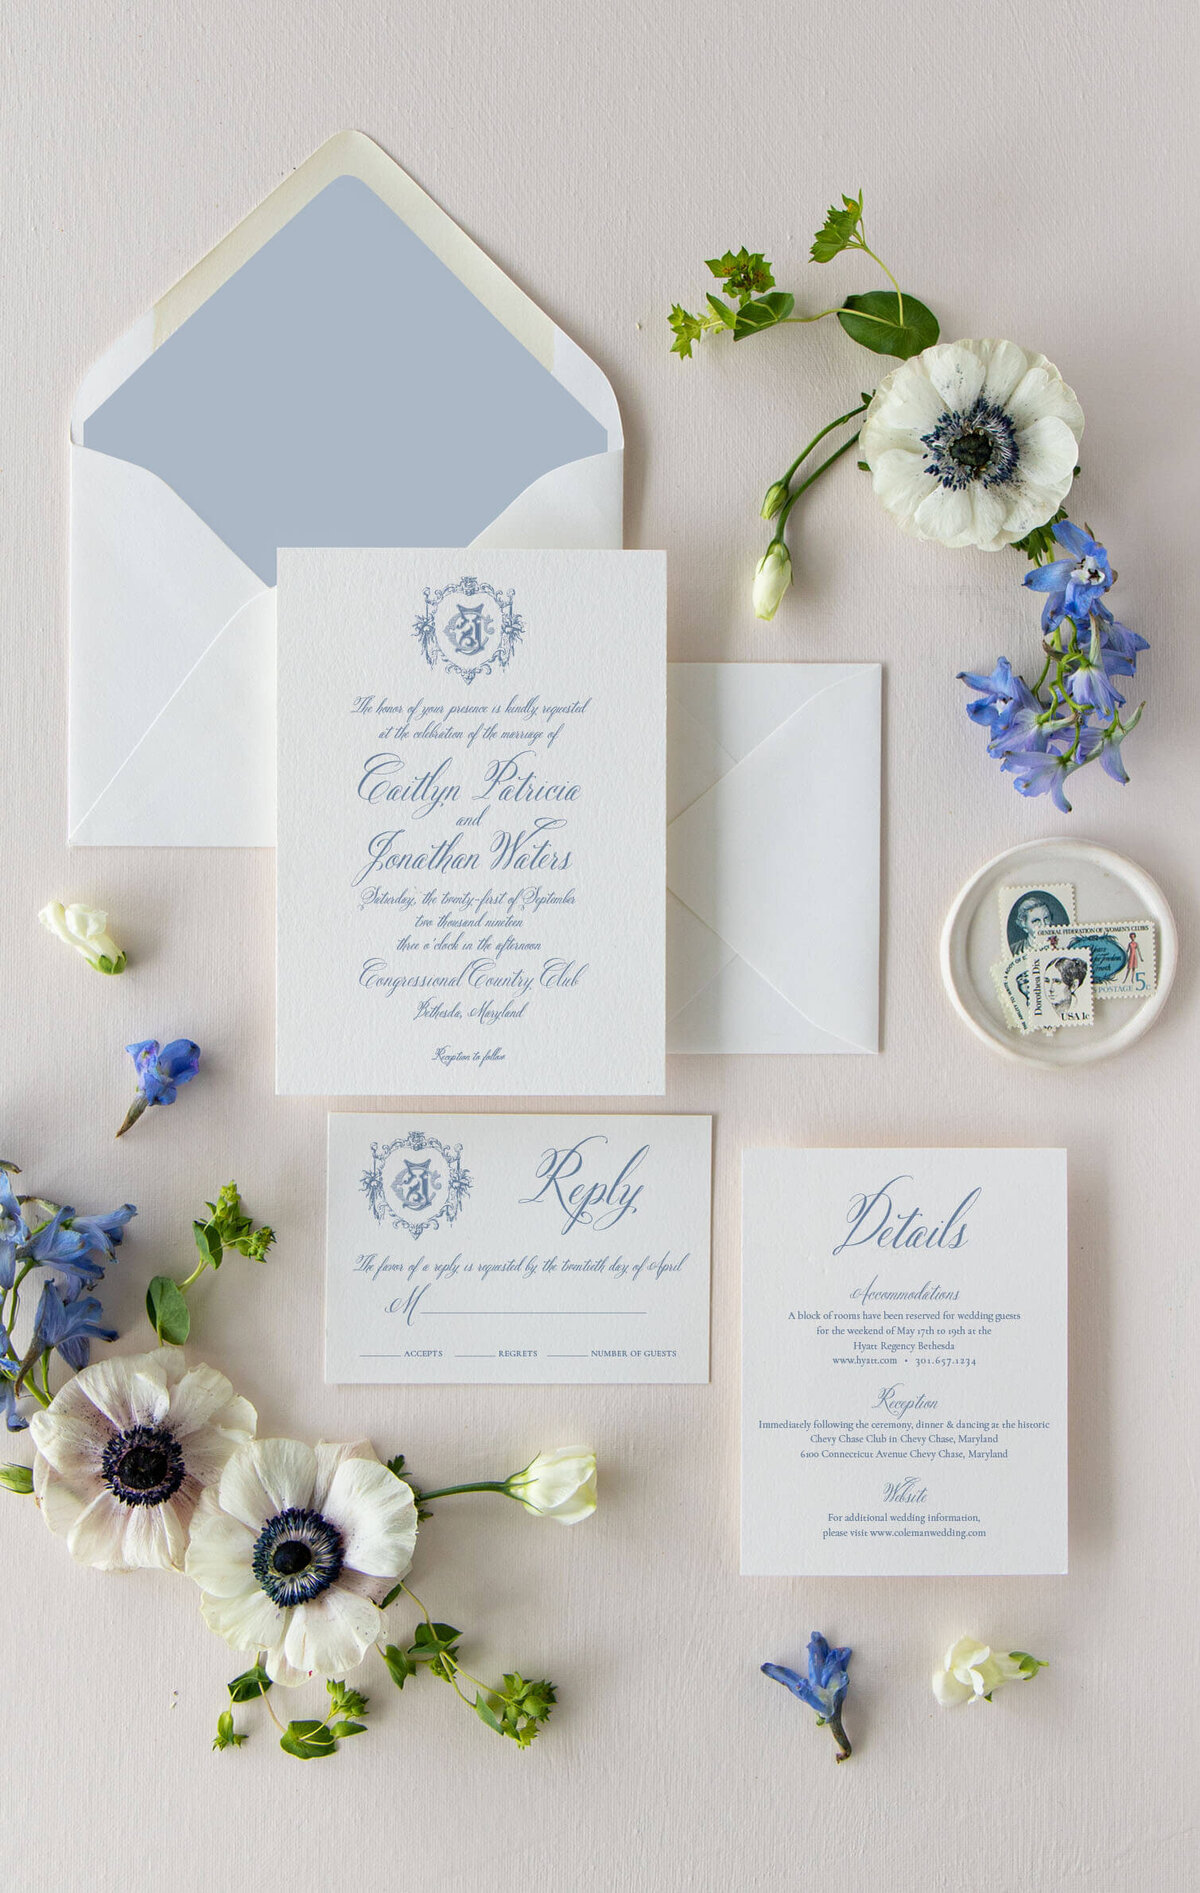 Classic wedding invitation suite with blue florals and blue accents.